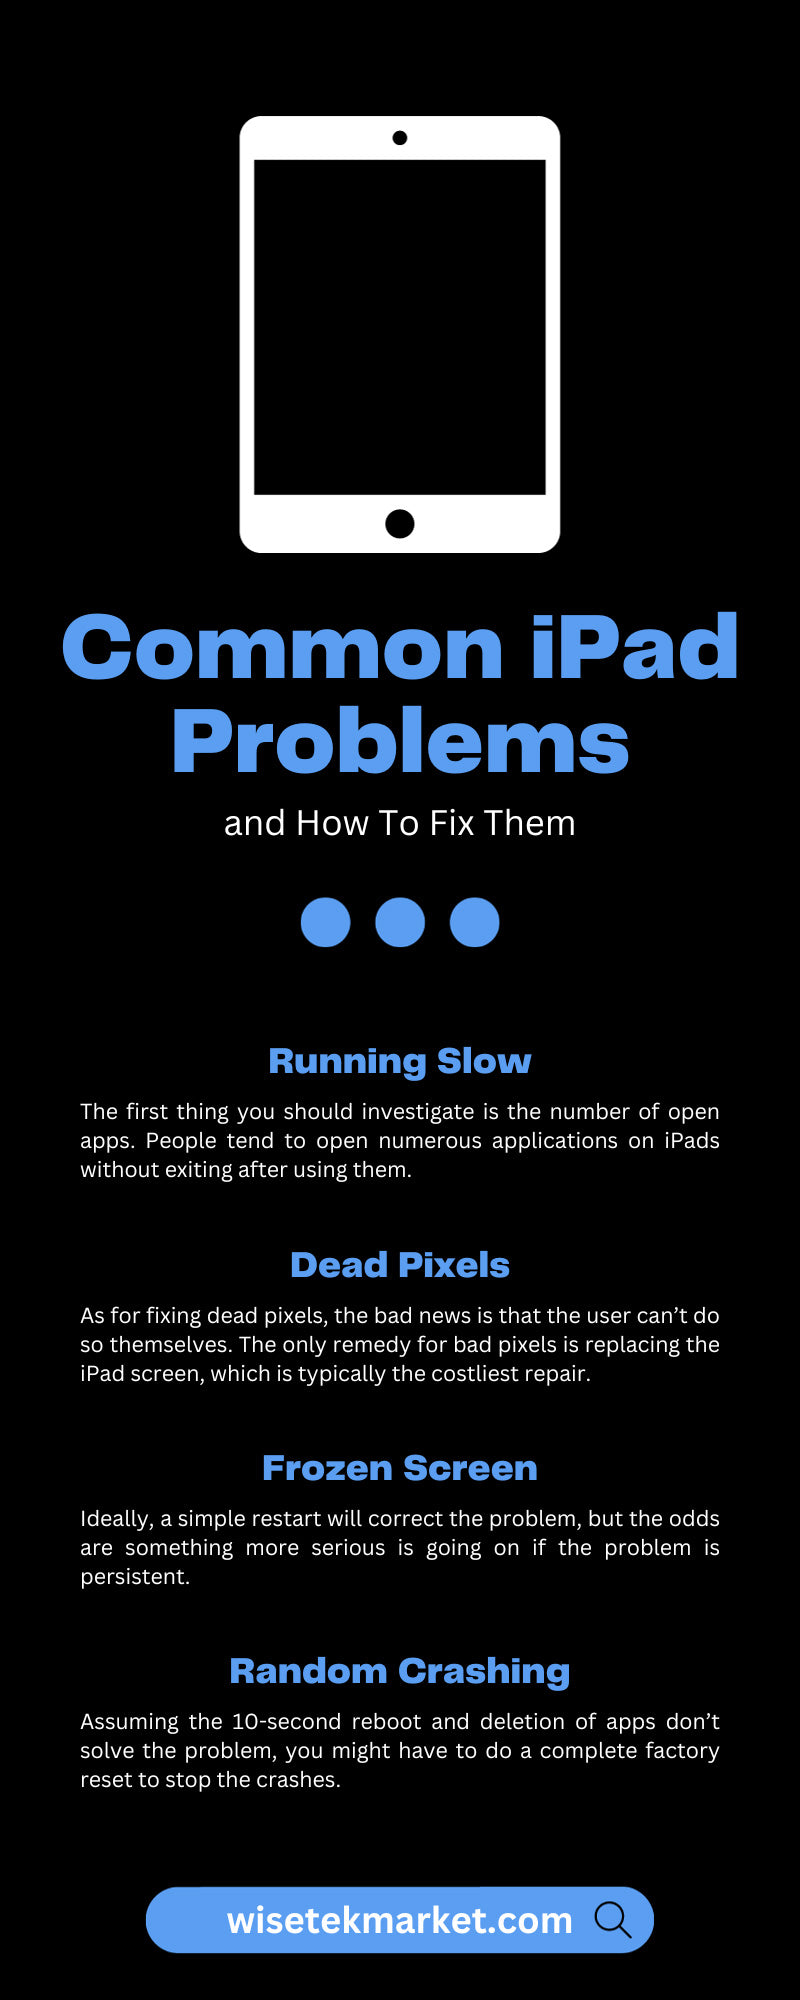 9 Common iPad Problems and How To Fix Them